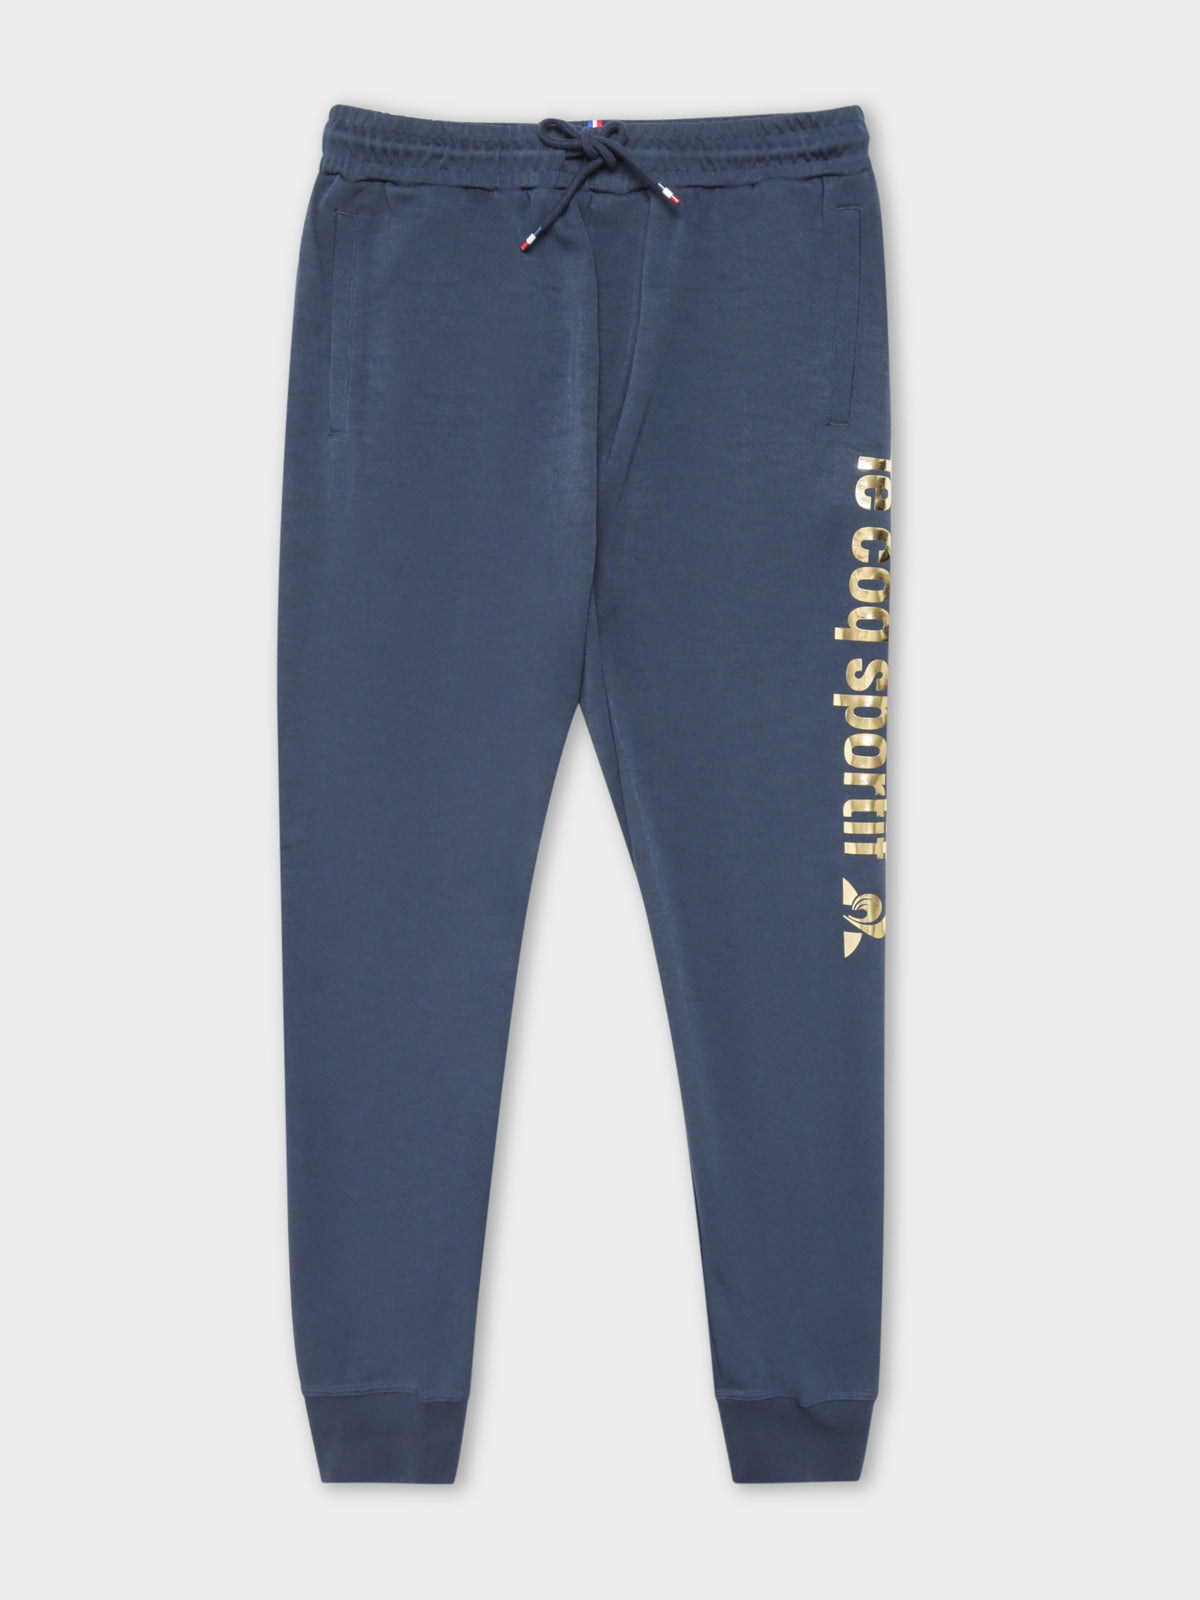 Roissy Foil Trackpants in Navy